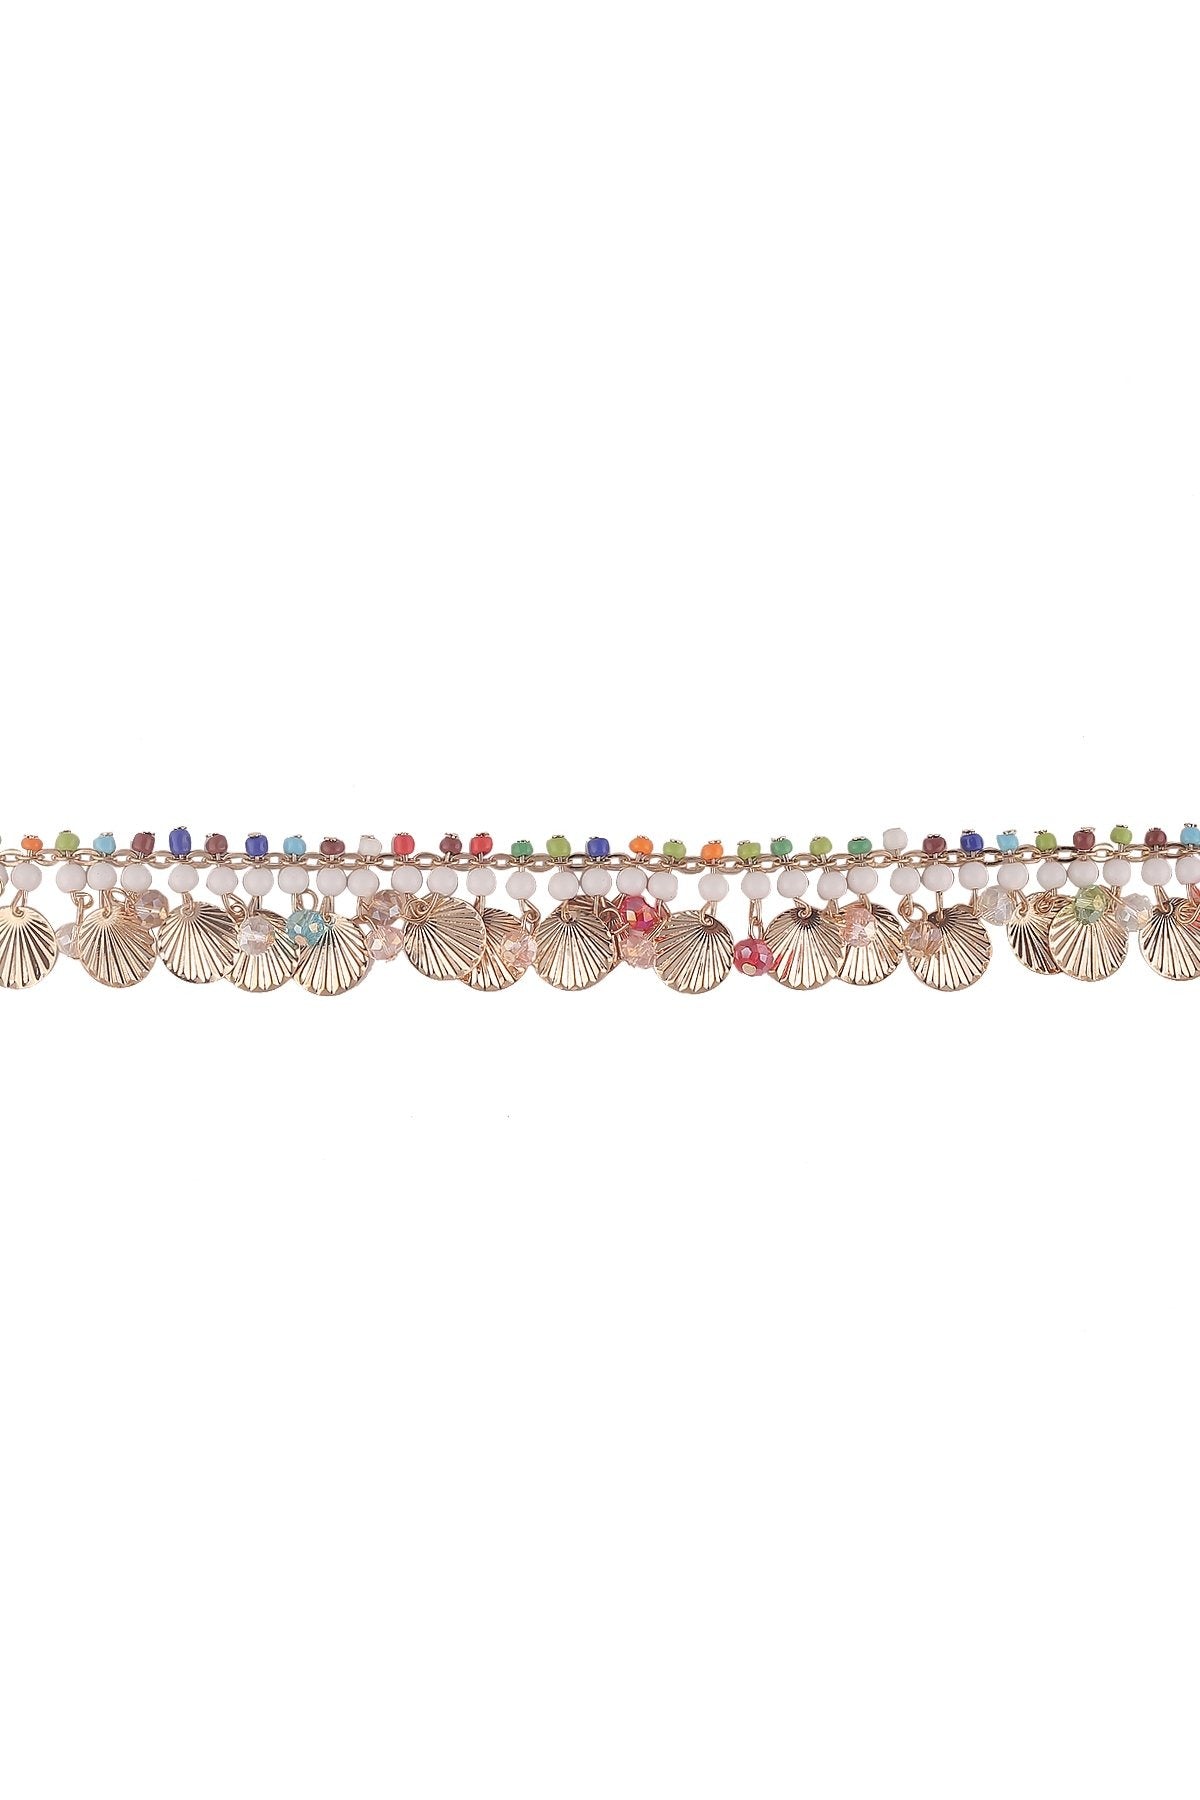 Multicolor Beaded Golden Chain Metal Border Lace